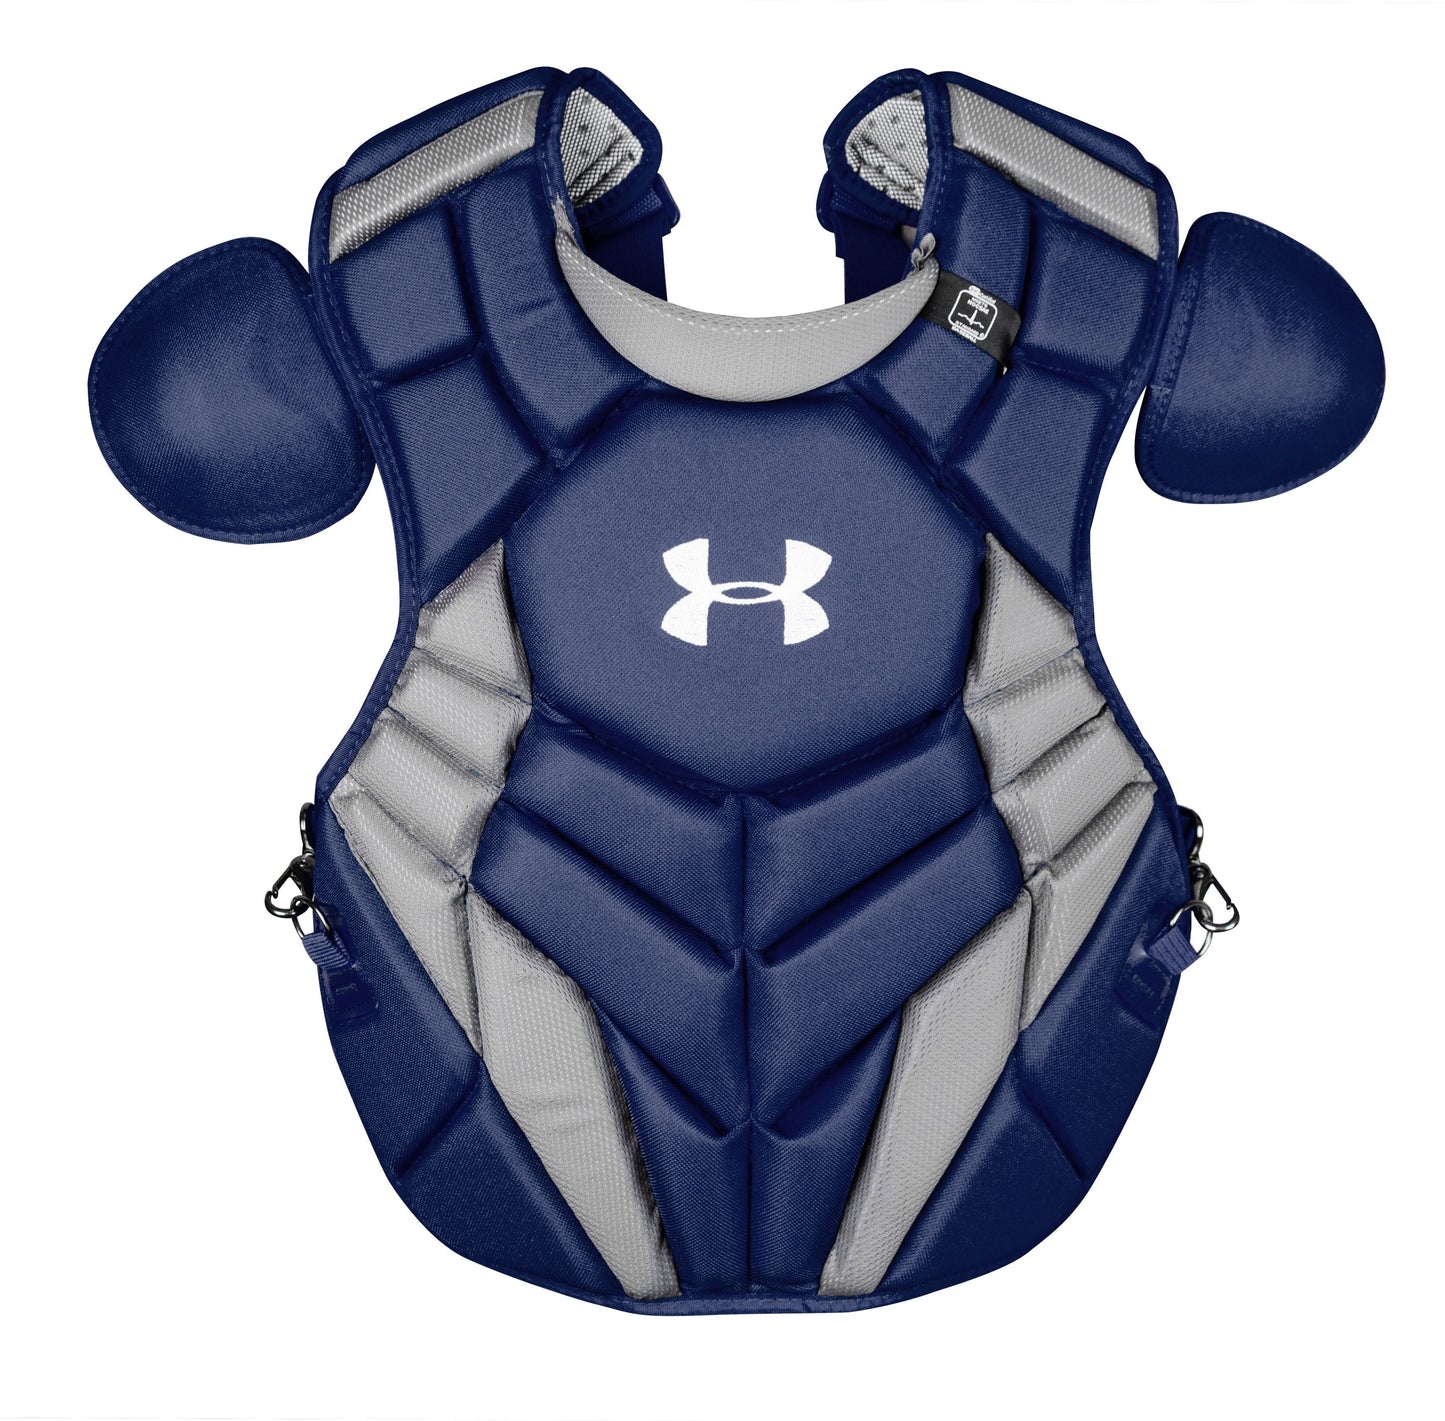 Under Armour Pro 4 Intermediate Chest Protector UACPCC4-SRP